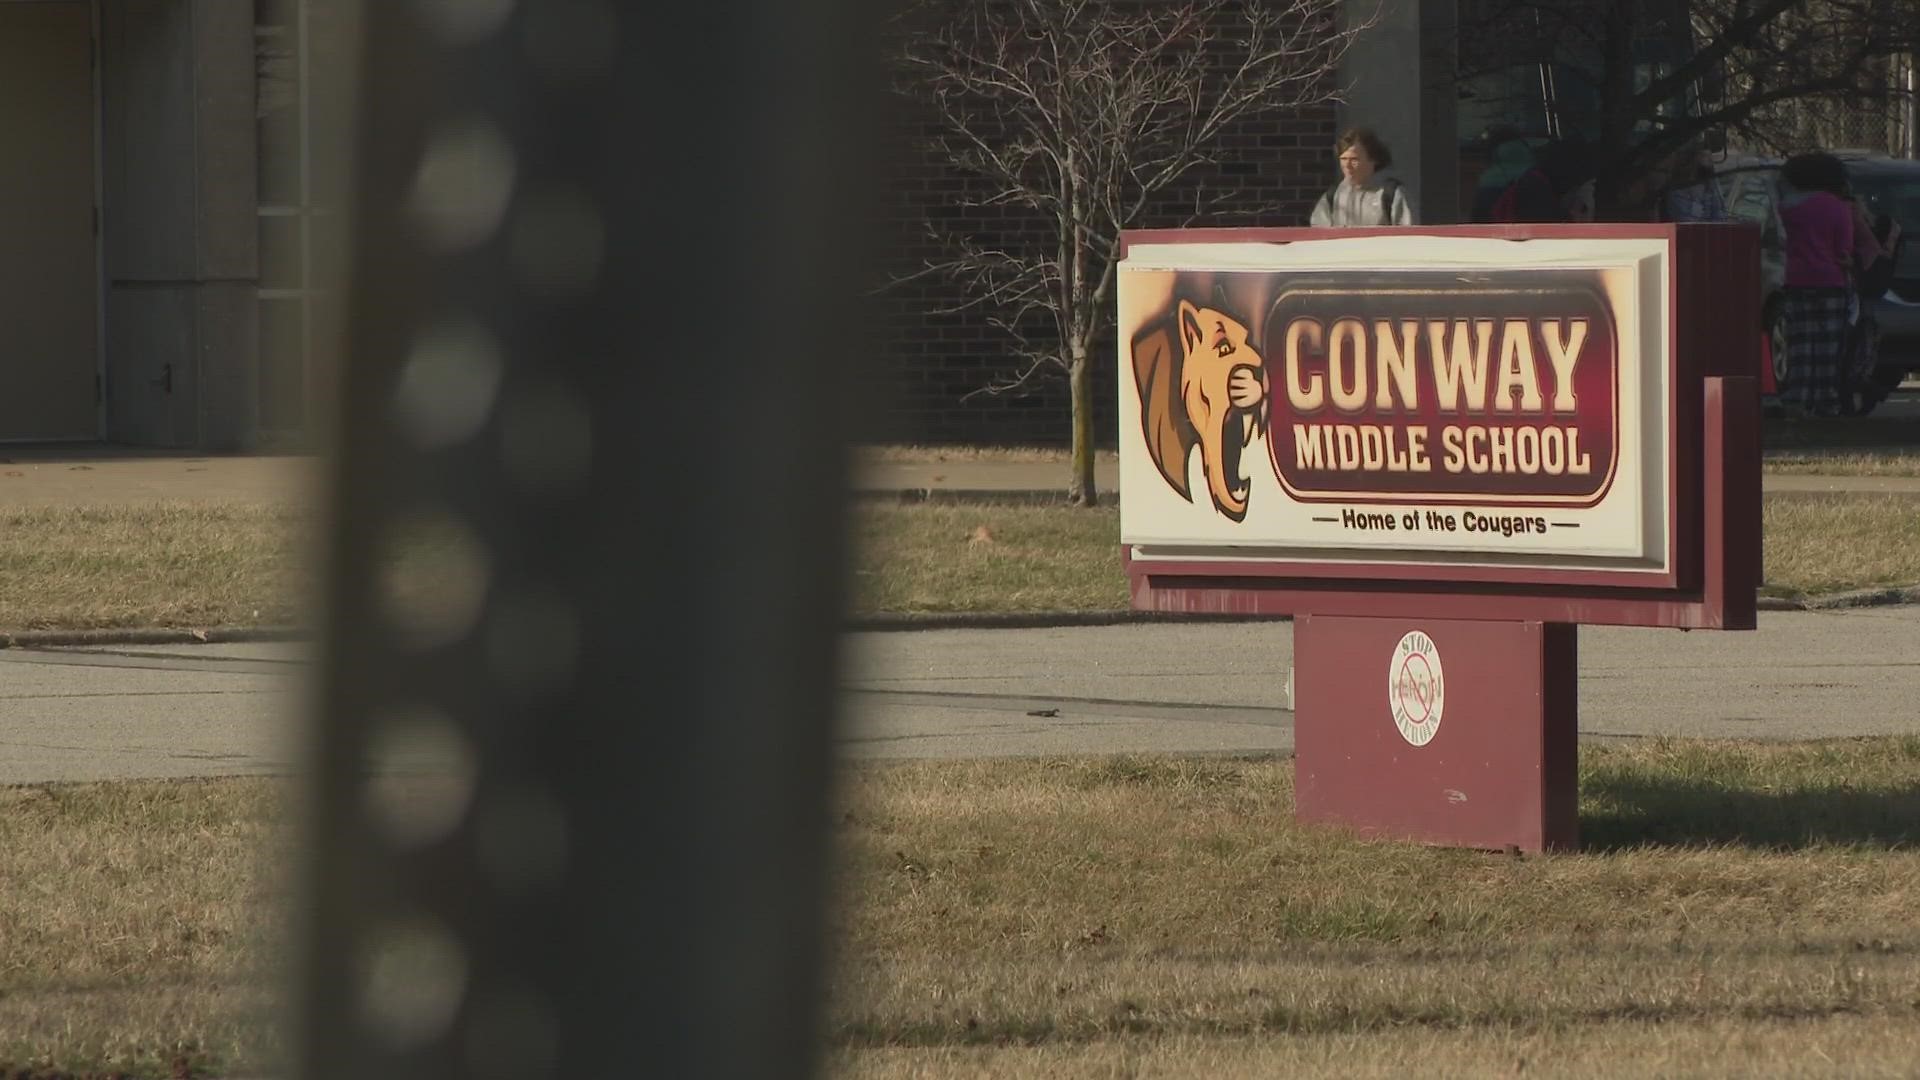 The Conway Middle School employee, who wished to remain anonymous, talked about the fears they have about the school.